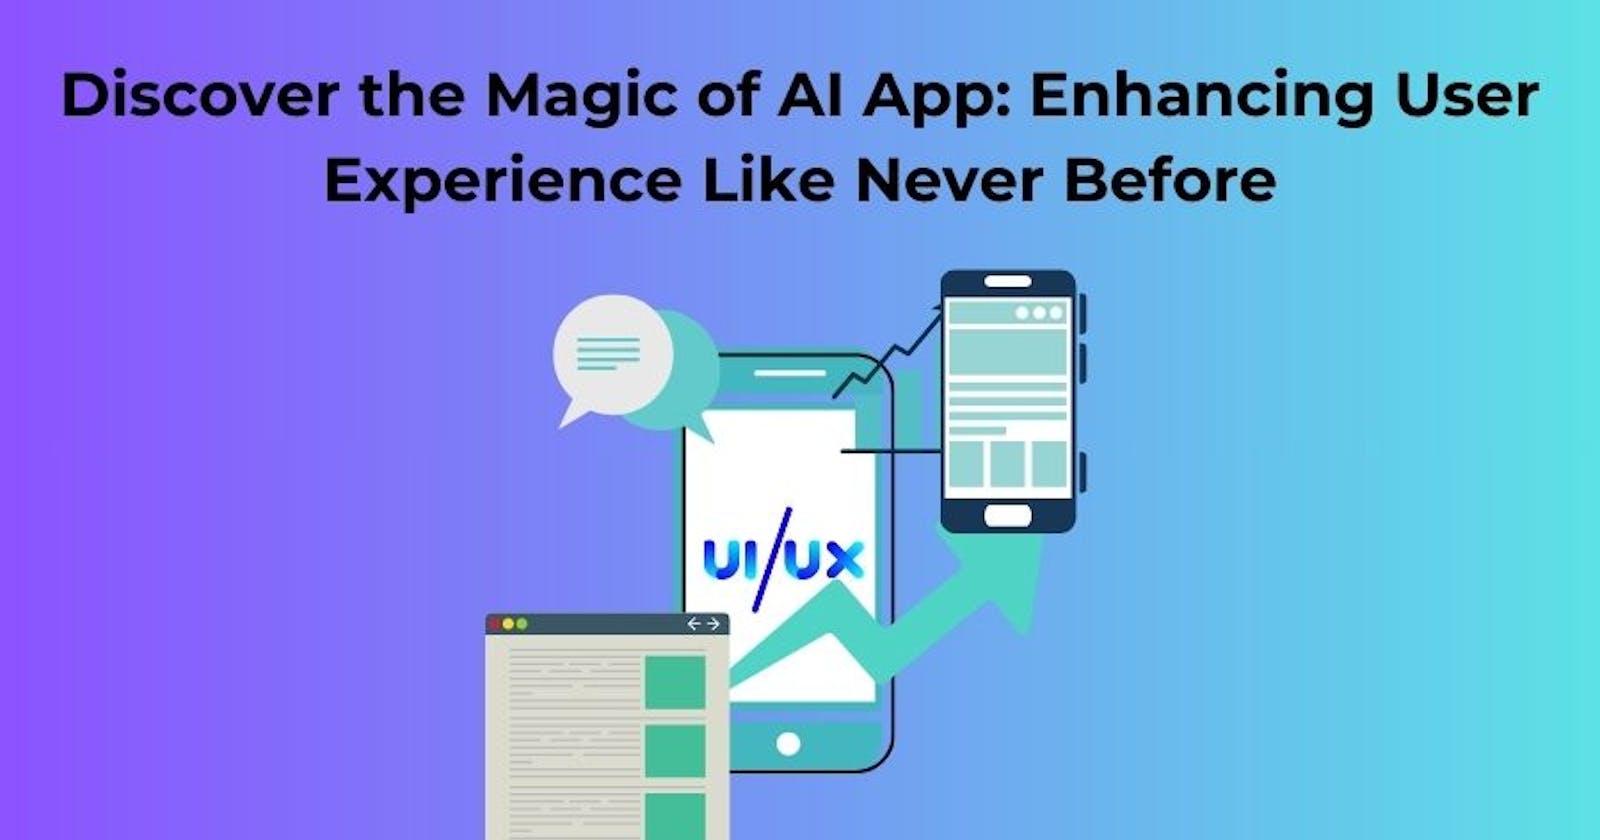 Discover the Magic of AI App: Enhancing User Experience Like Never Before